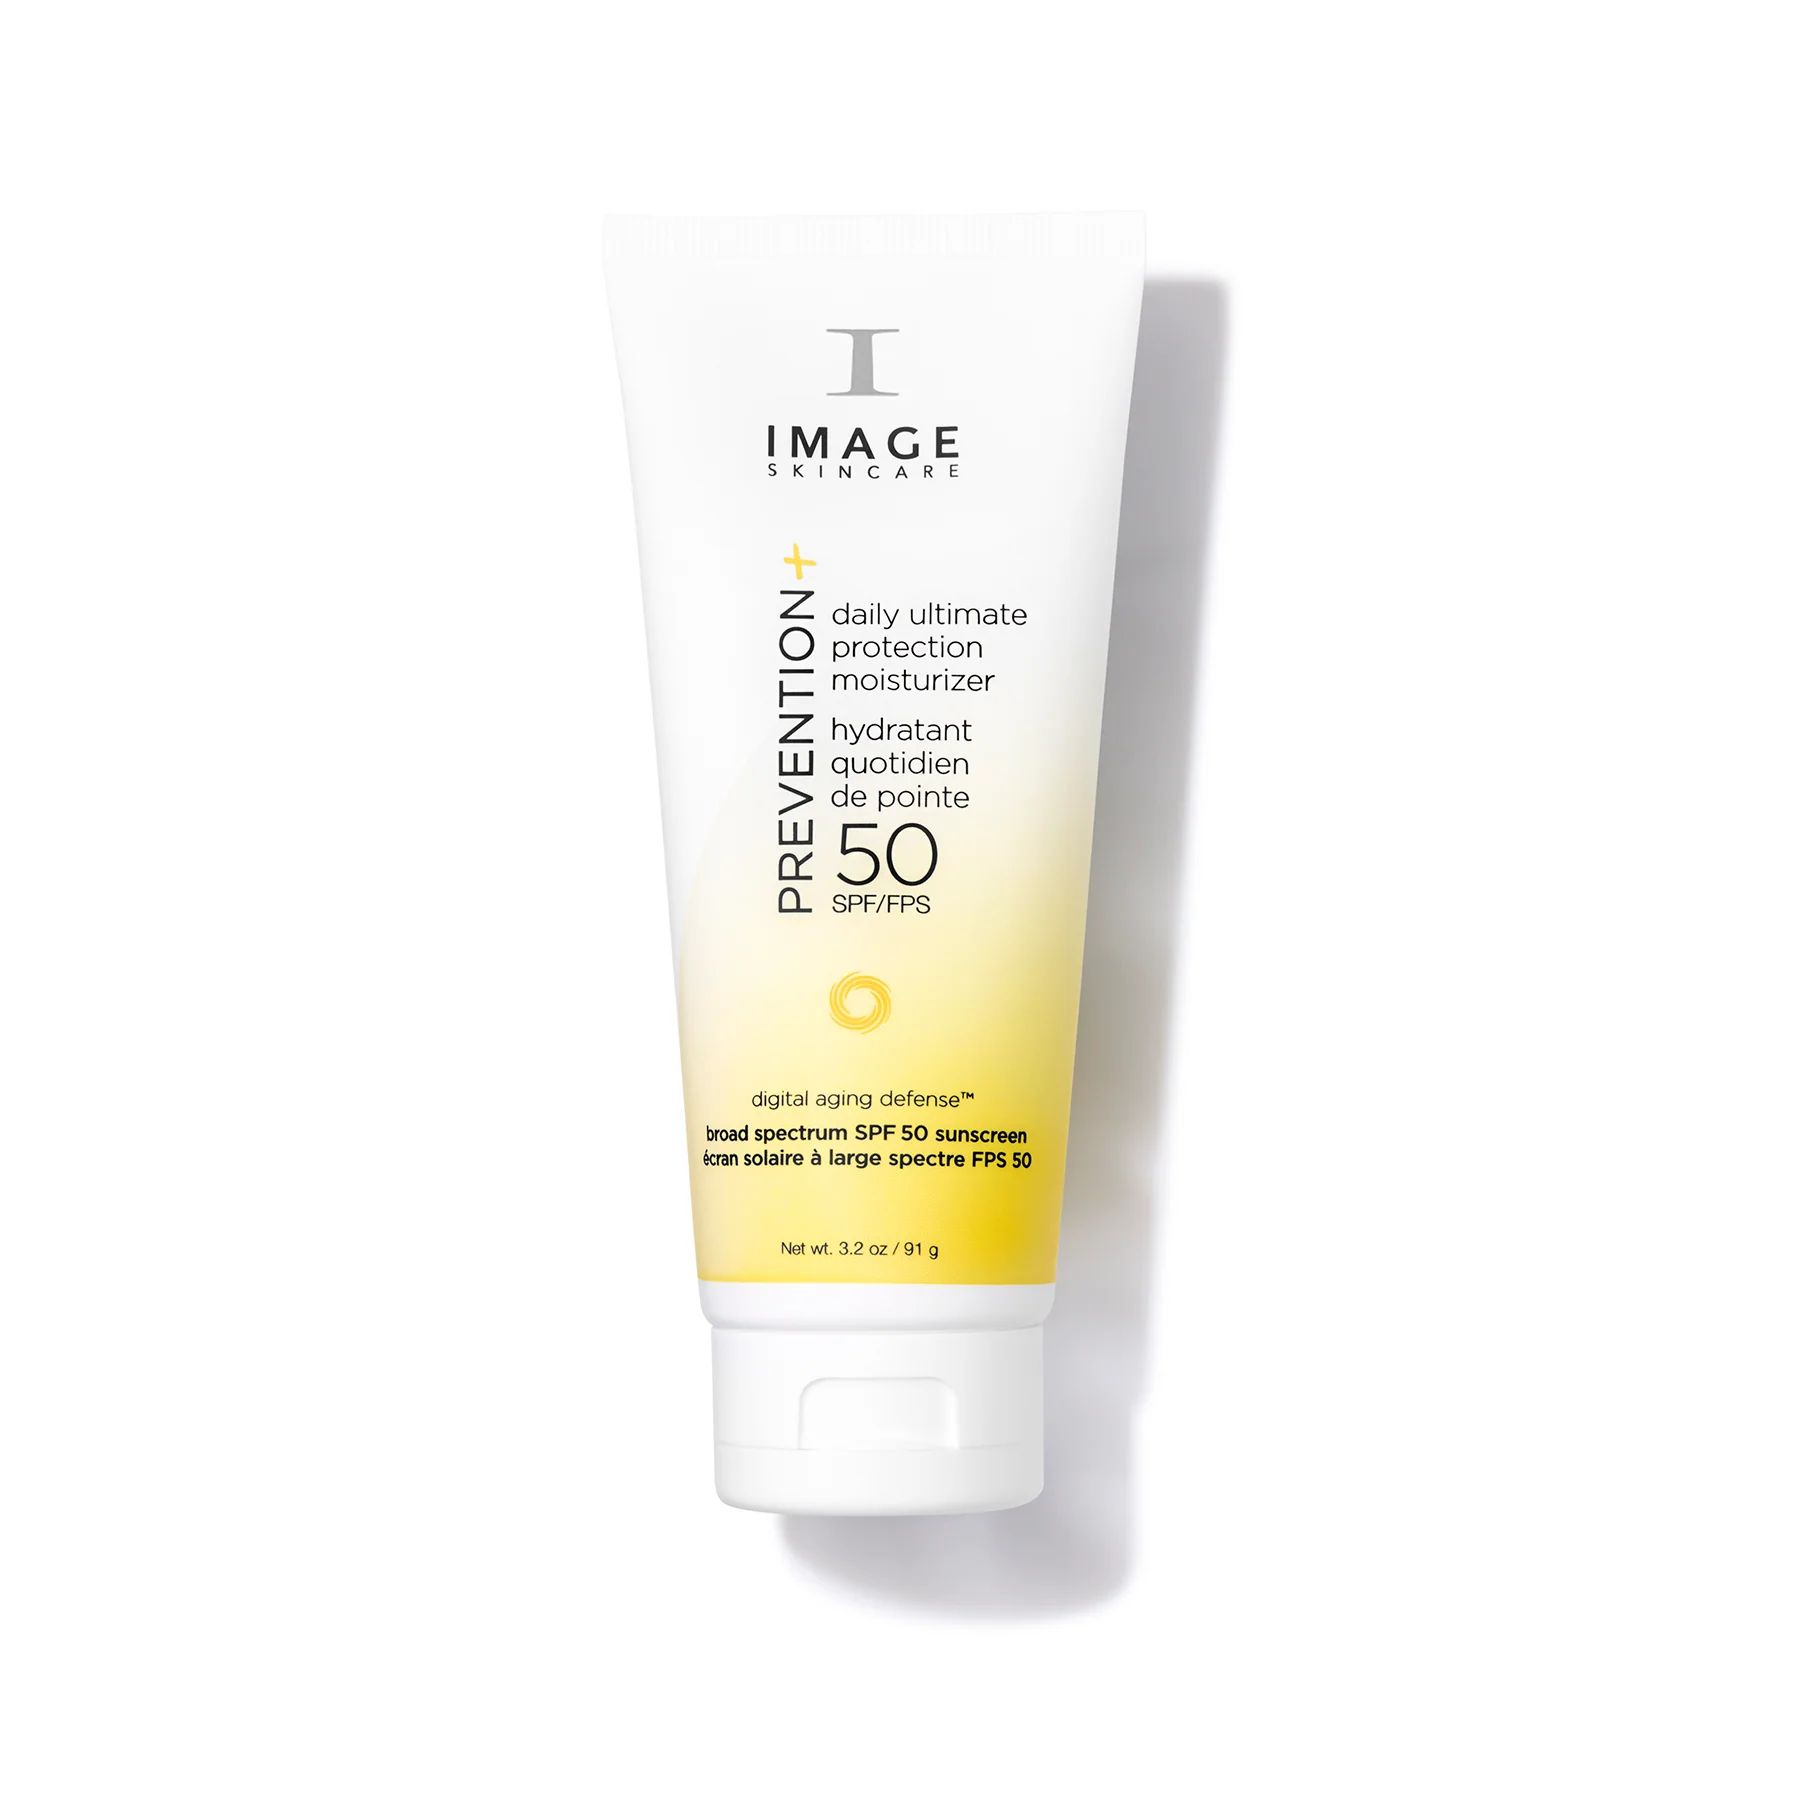 PREVENTION+® daily ultimate protection moisturizer SPF 50 | Image Skincare